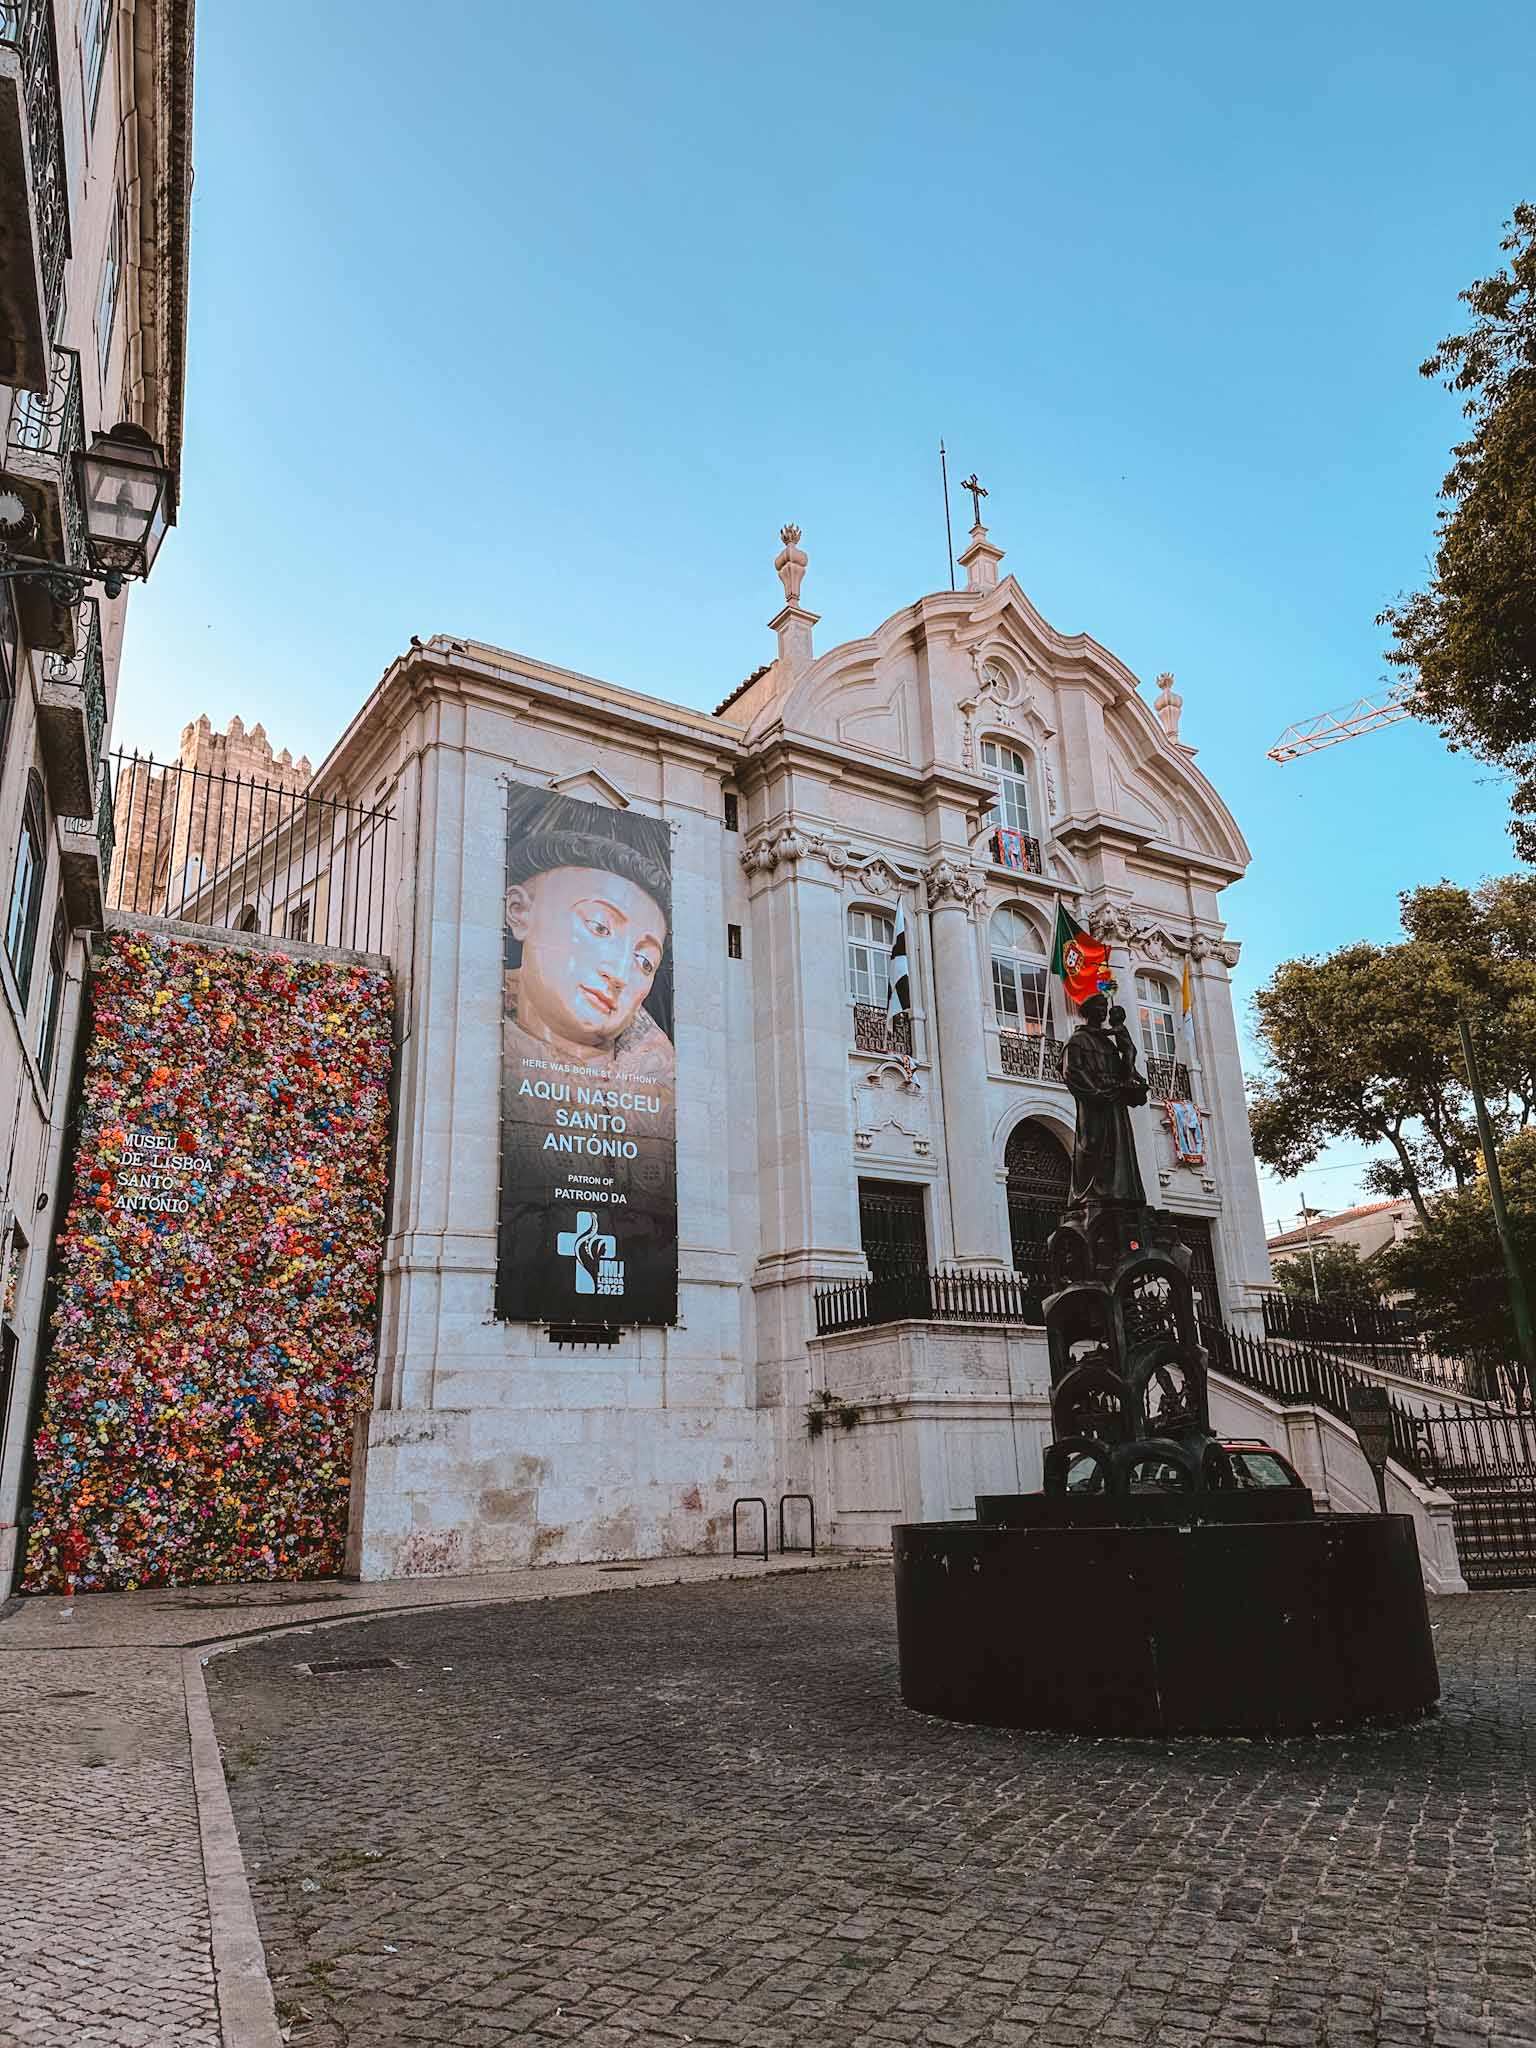 Best Instagram photo spots in Lisbon, Portugal - Flowerwall at the Museum of Saint Anthony